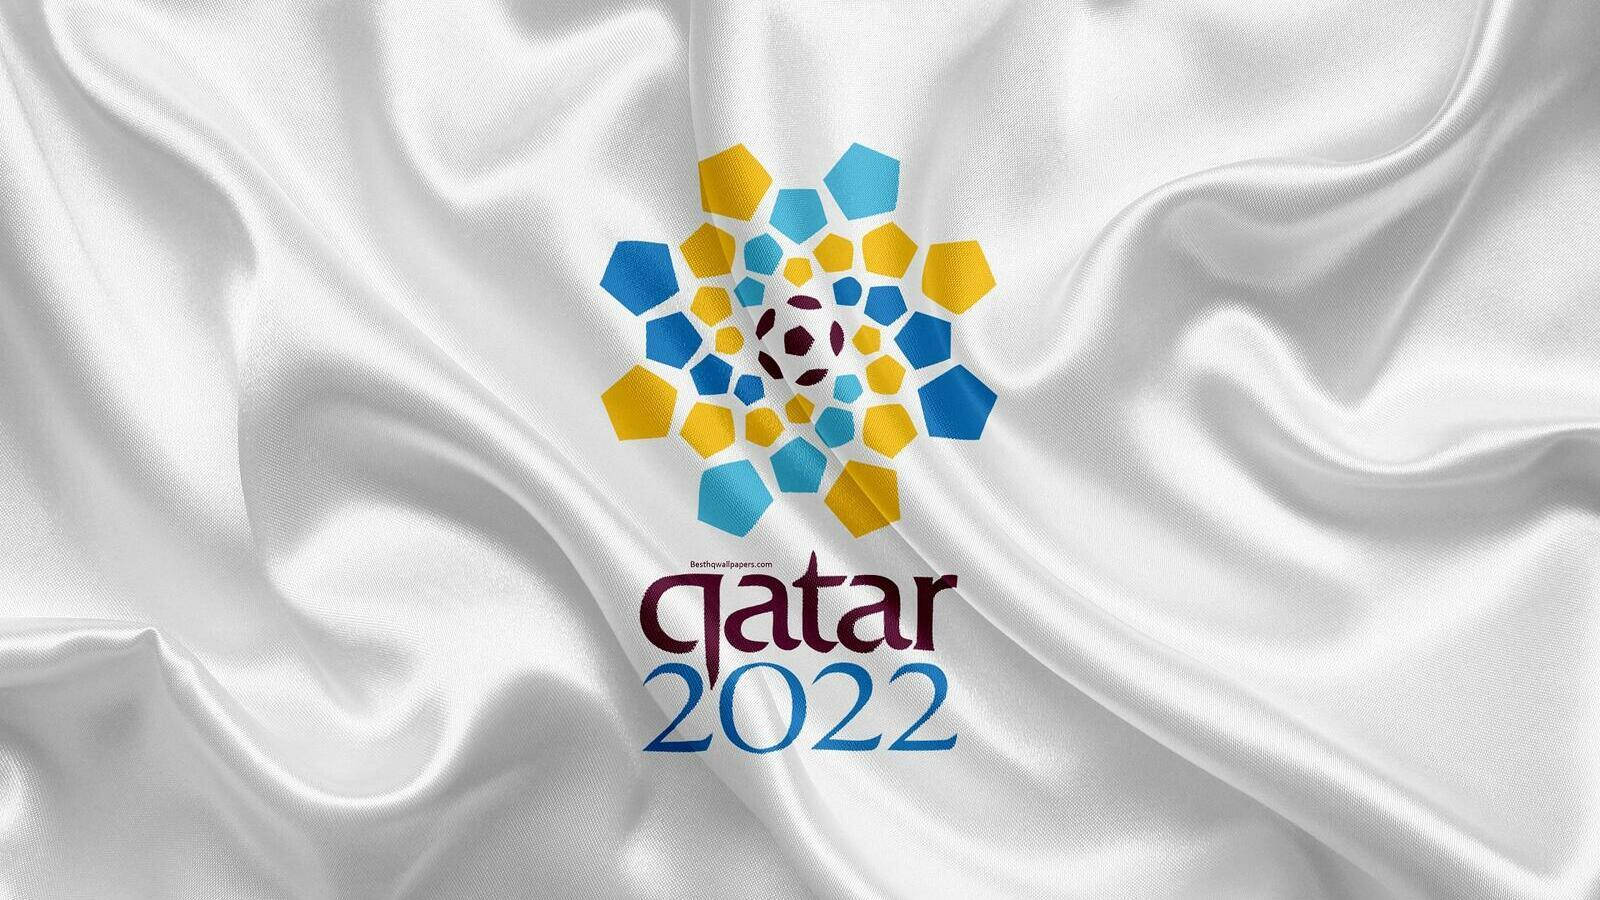 Feel The Excitement With The Upcoming Fifa World Cup 2022! Background